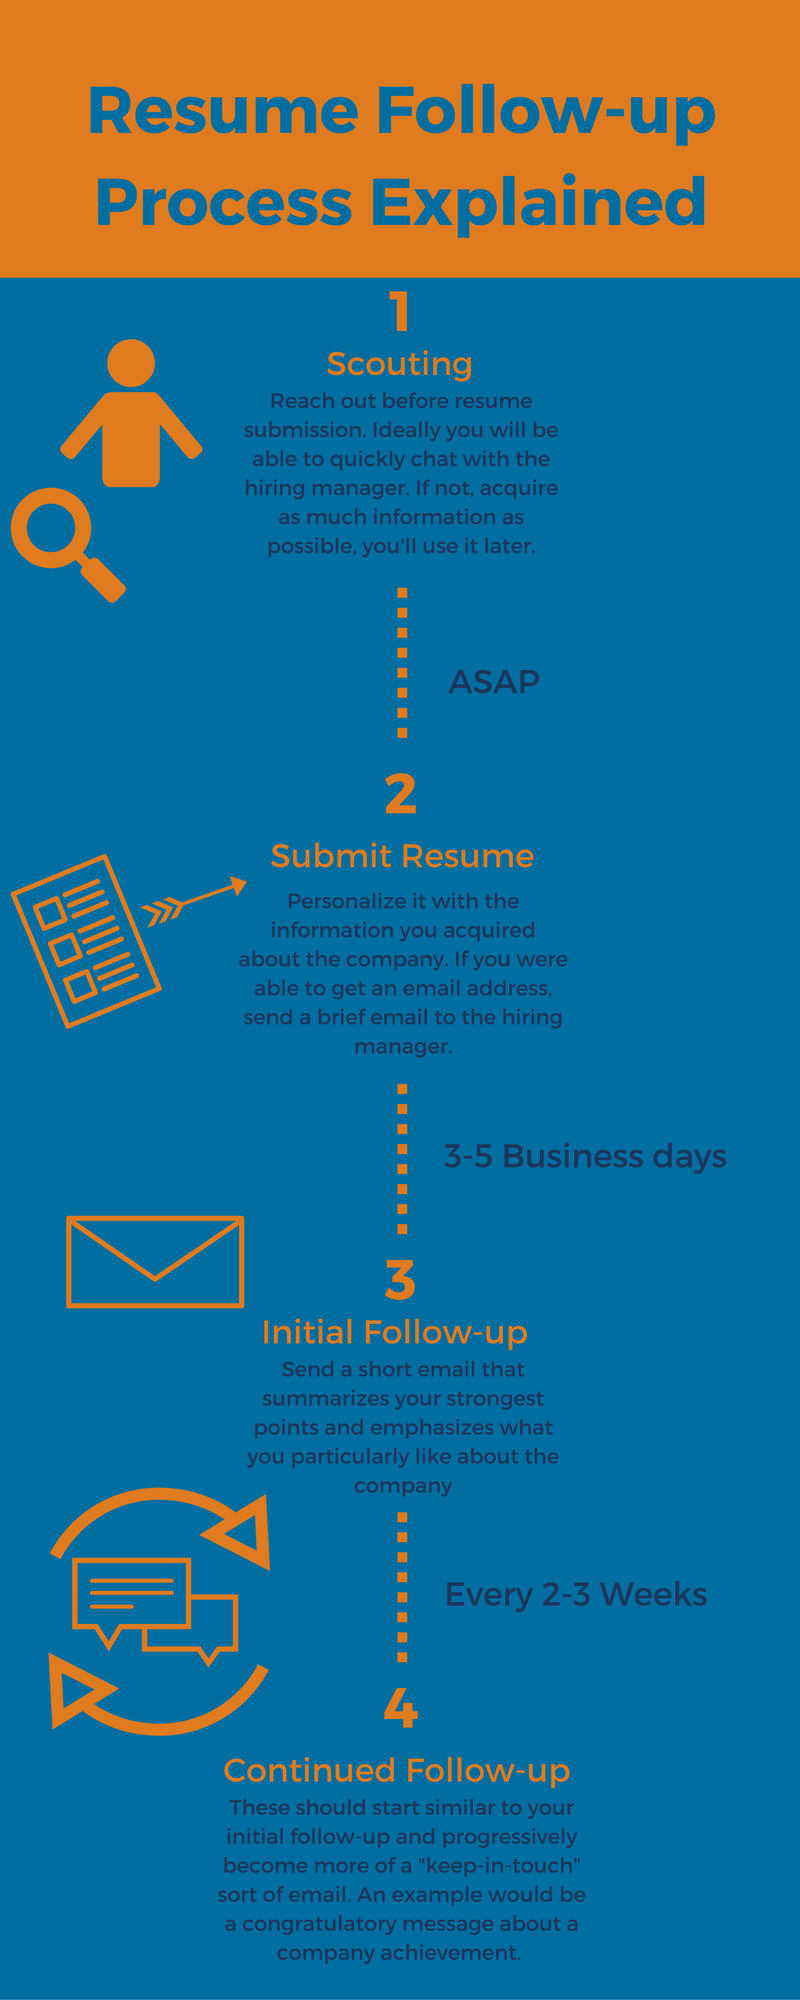 Resume Follow up Process Explained